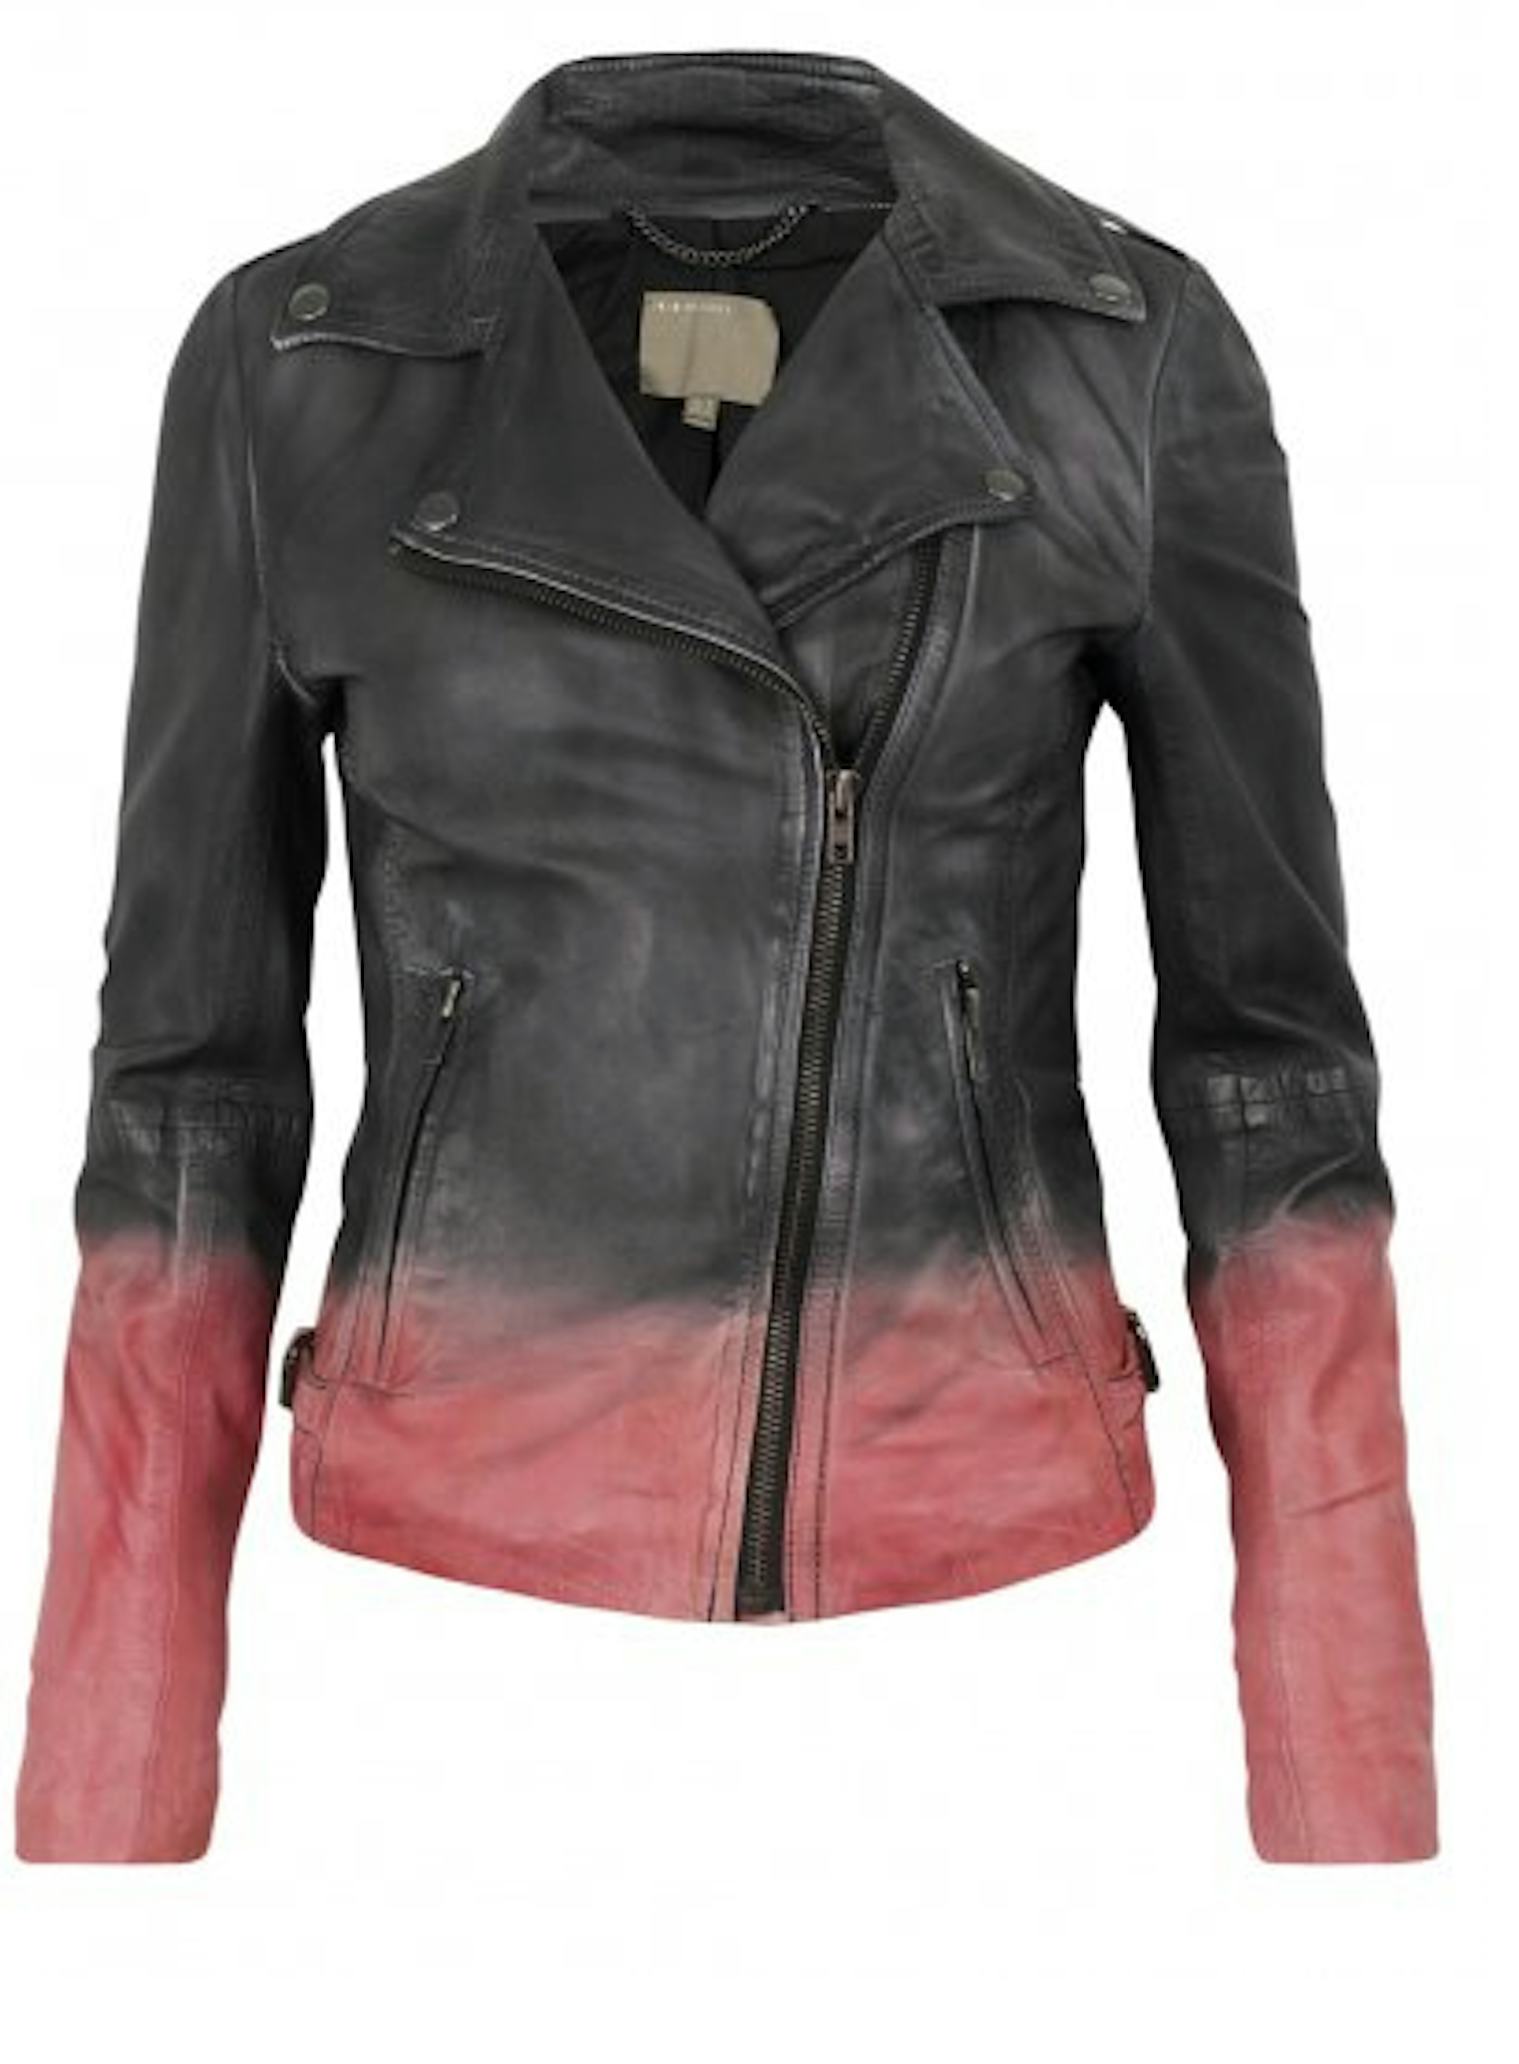 6 Ways To Update Your Classic Black Leather Jacket (DIY, Optional)